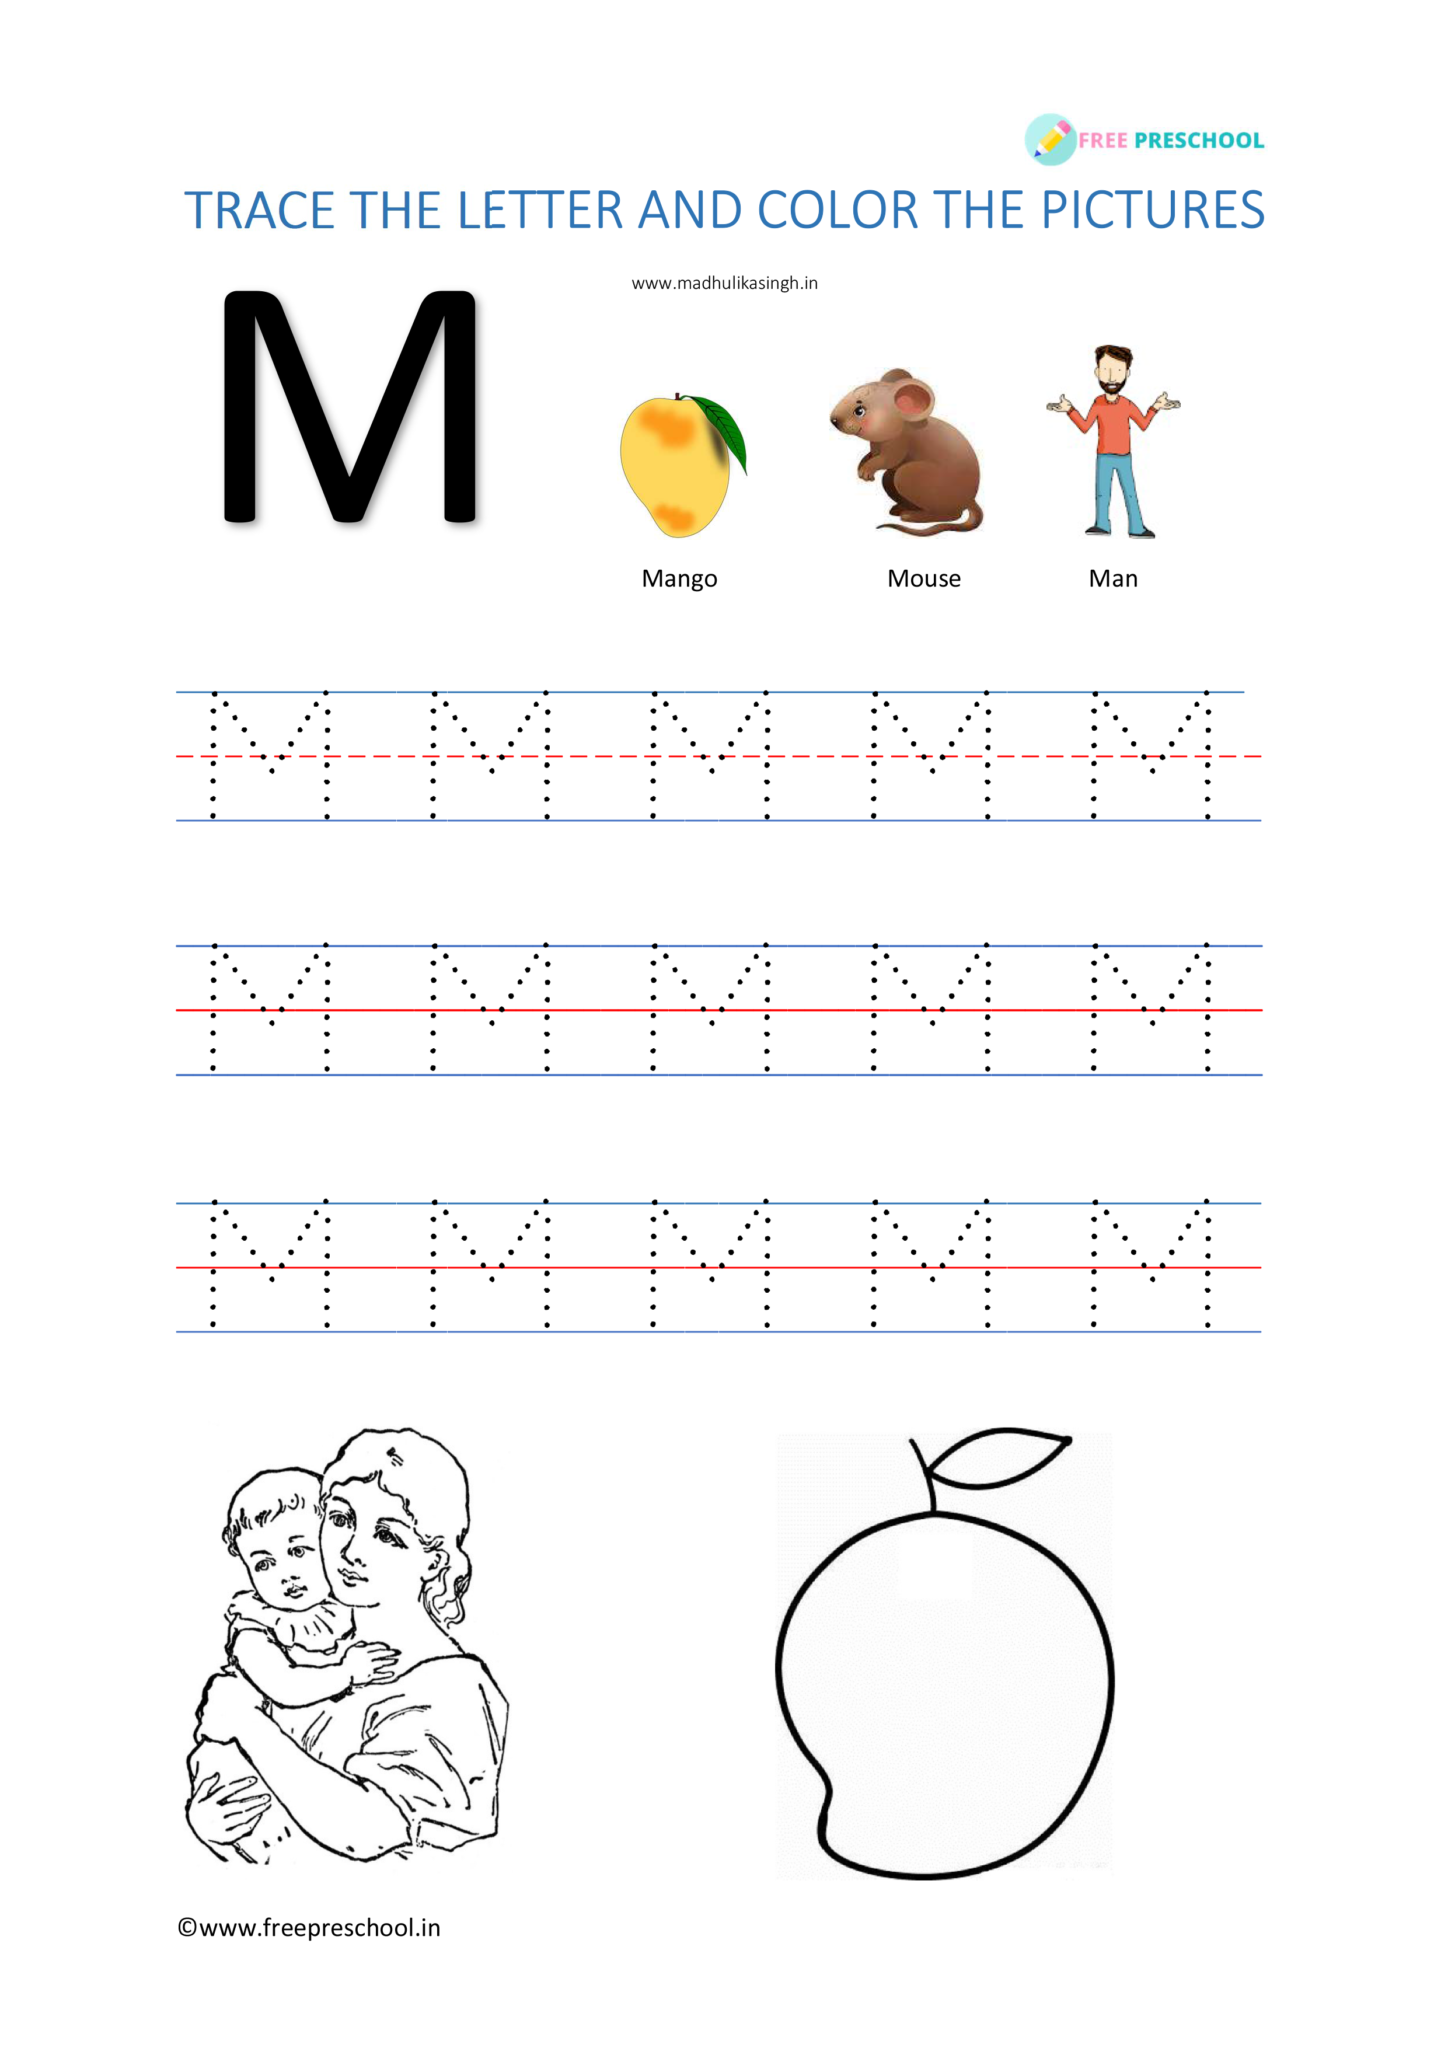 hindi-alphabet-tracing-worksheets-printable-pdf-a-to-jania-56-pages-hindi-alphabet-practice